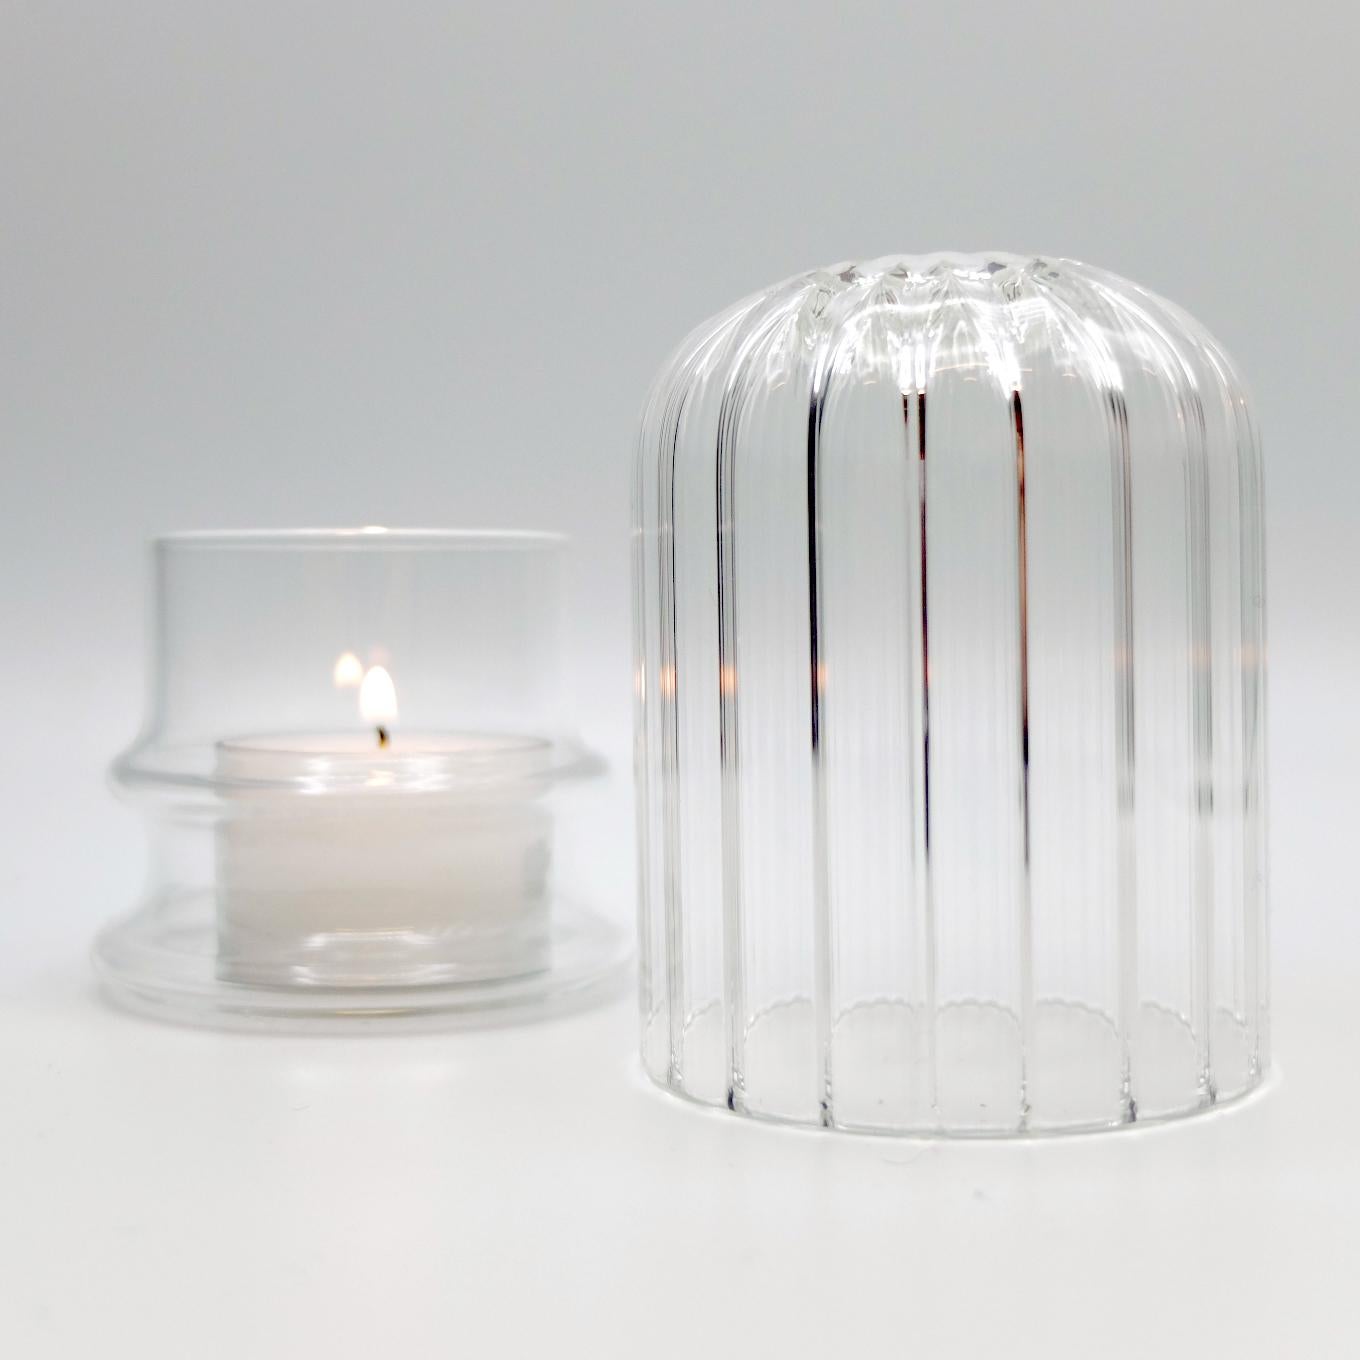 Italian 21th Century, Borosilicate Glass Candle Lamp MOSCARDINO BIG, Handcrafted, Kanz For Sale